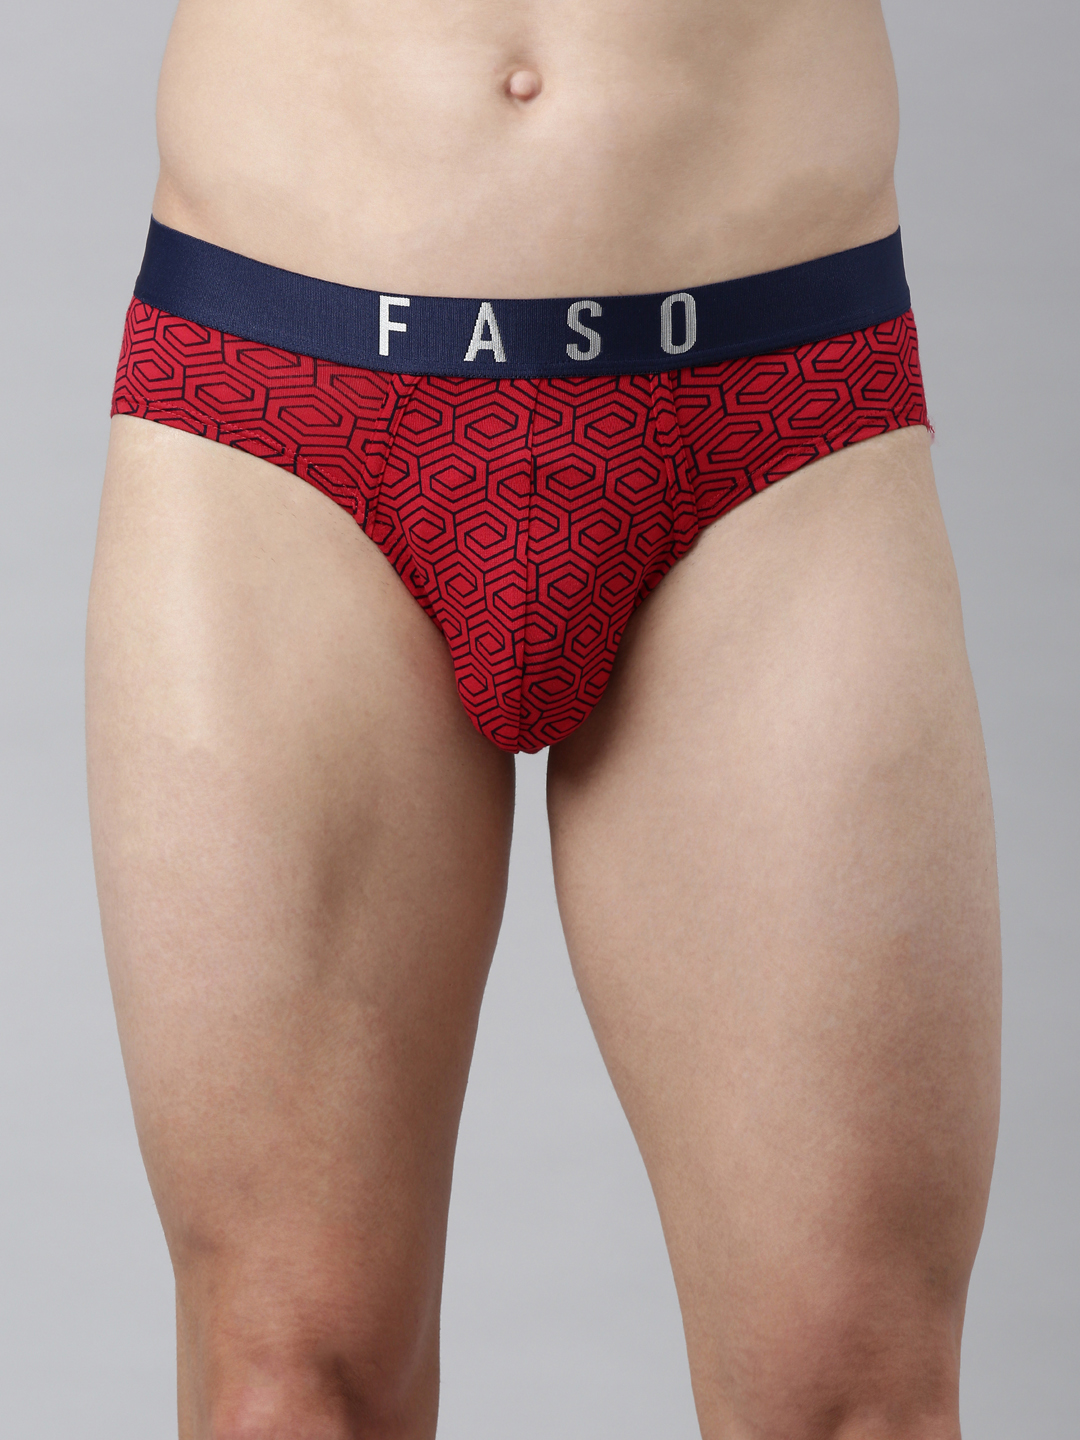 100% COTTON NEW PATTERN PRINTED BRIEF - FS2004 Assorted (PACK OF 2) - FASO